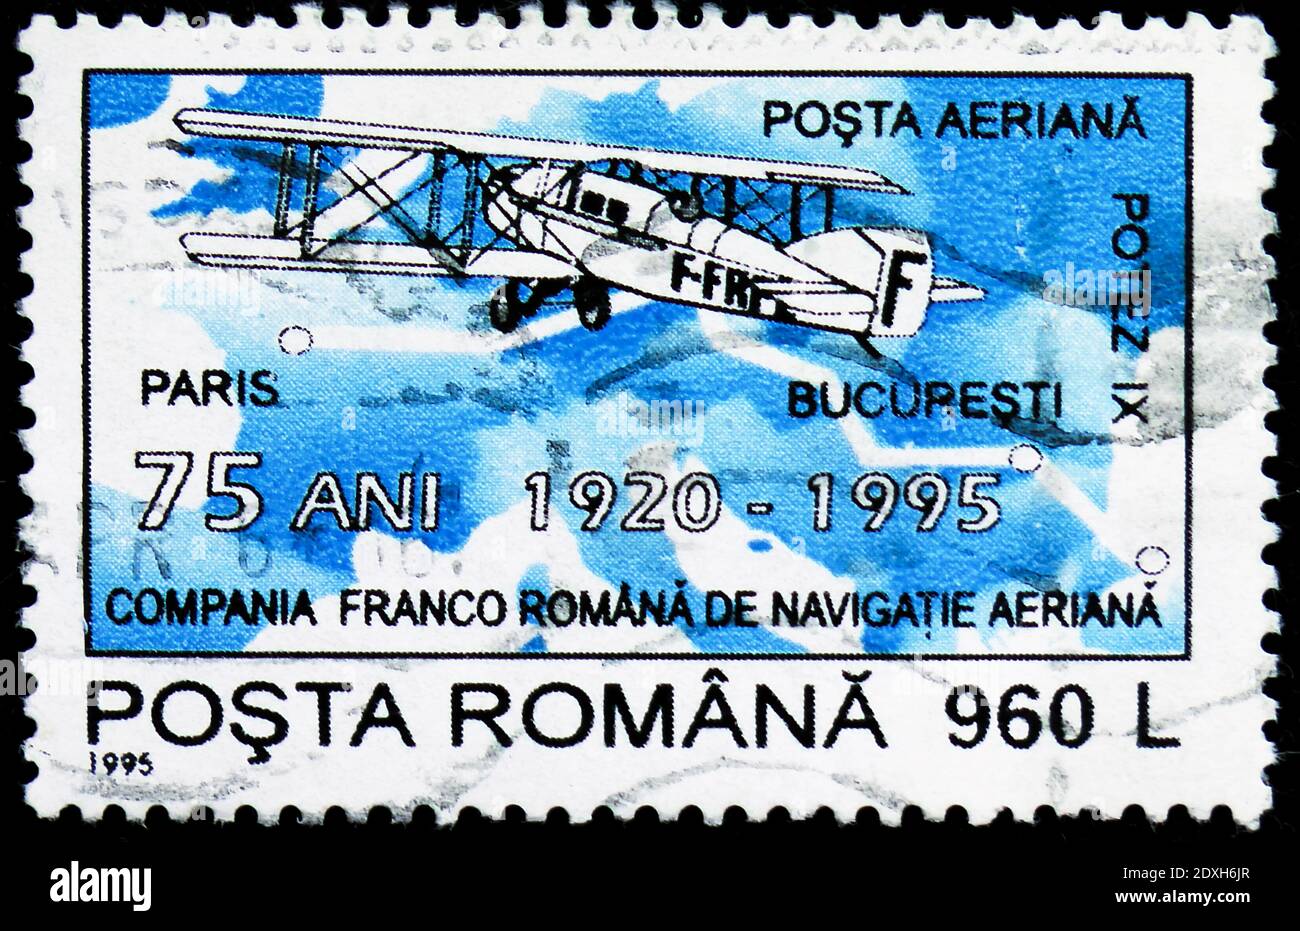 MOSCOW, RUSSIA - MARCH 30, 2019: A stamp printed in Romania shows Potez IX Airliner (1921), French-Romanian Aeronautical Agreement, 75th Anniversary s Stock Photo